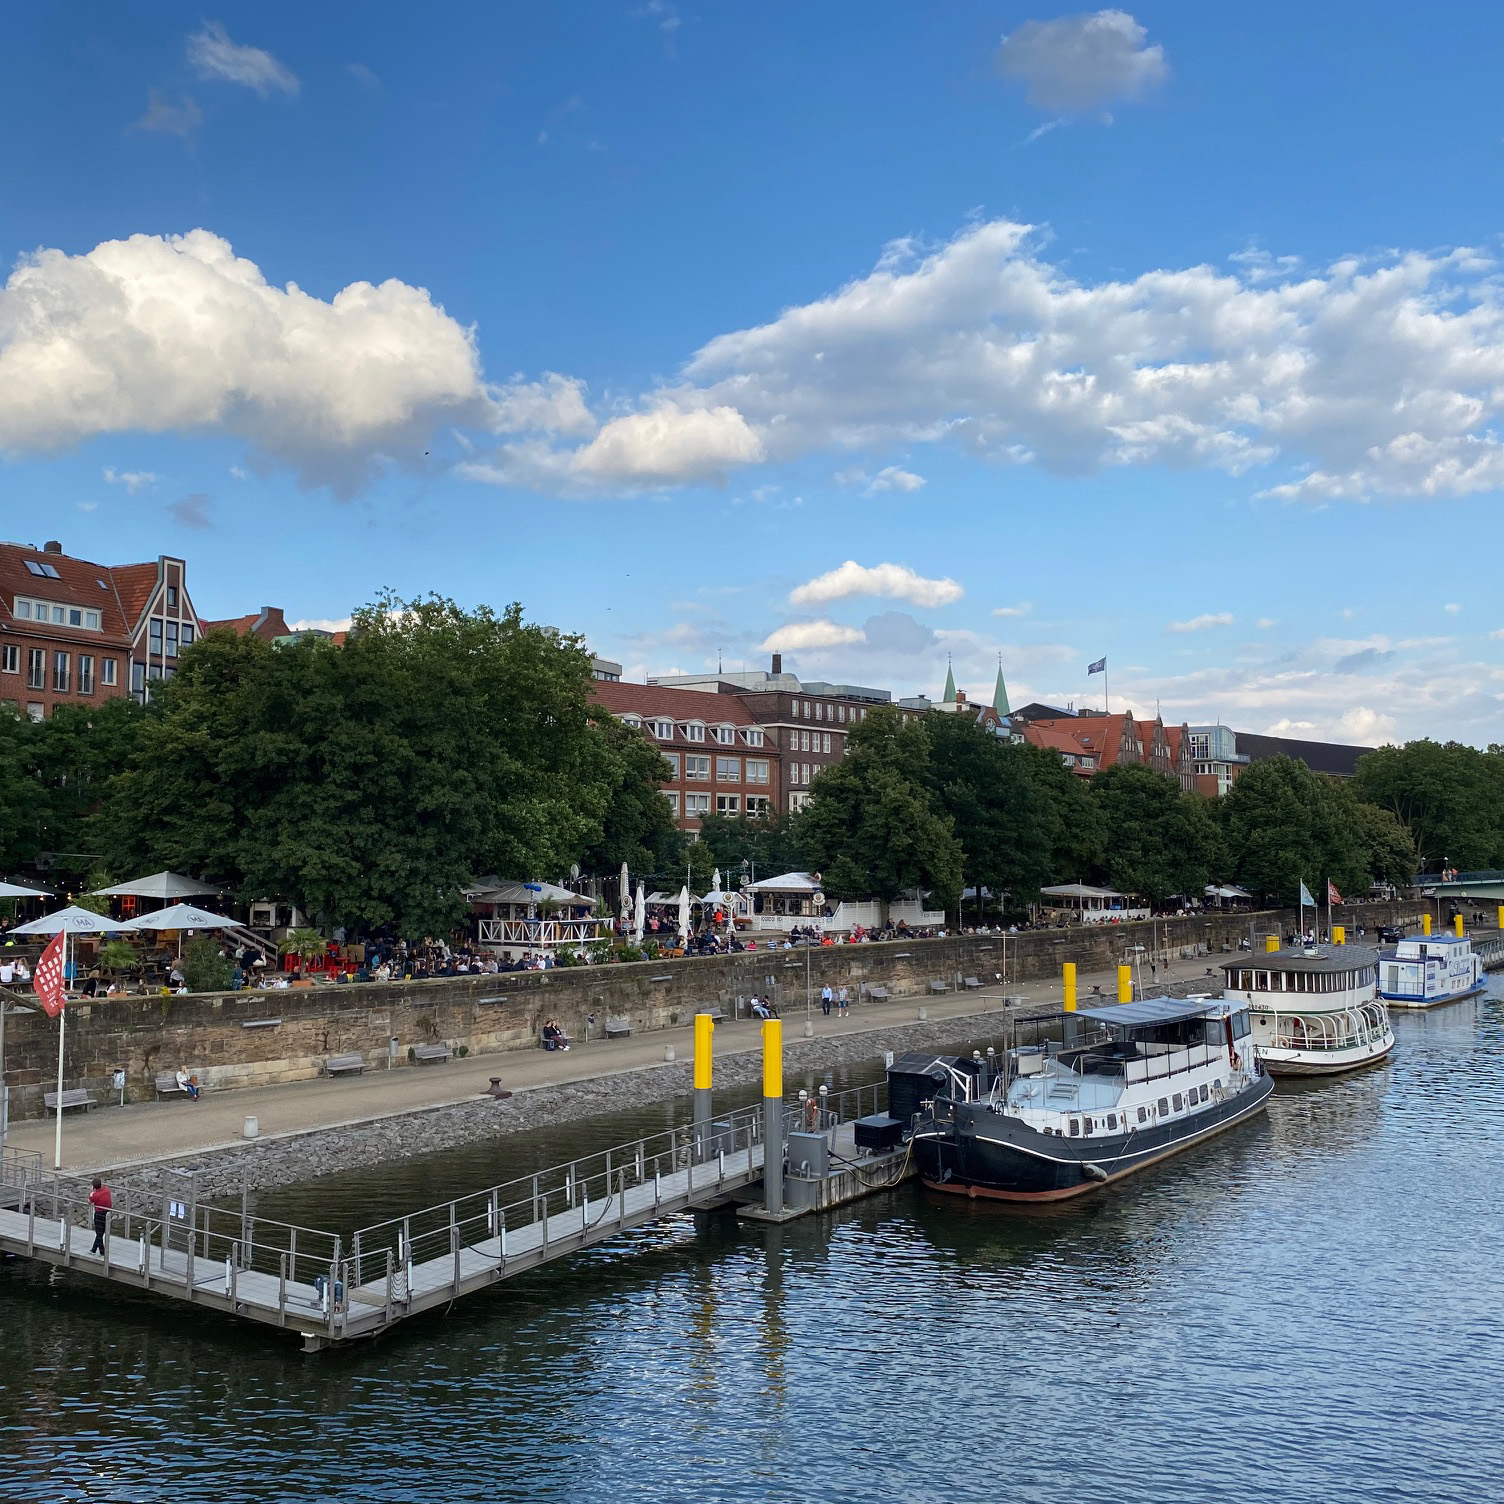 pubs & restaurants at the river Weser